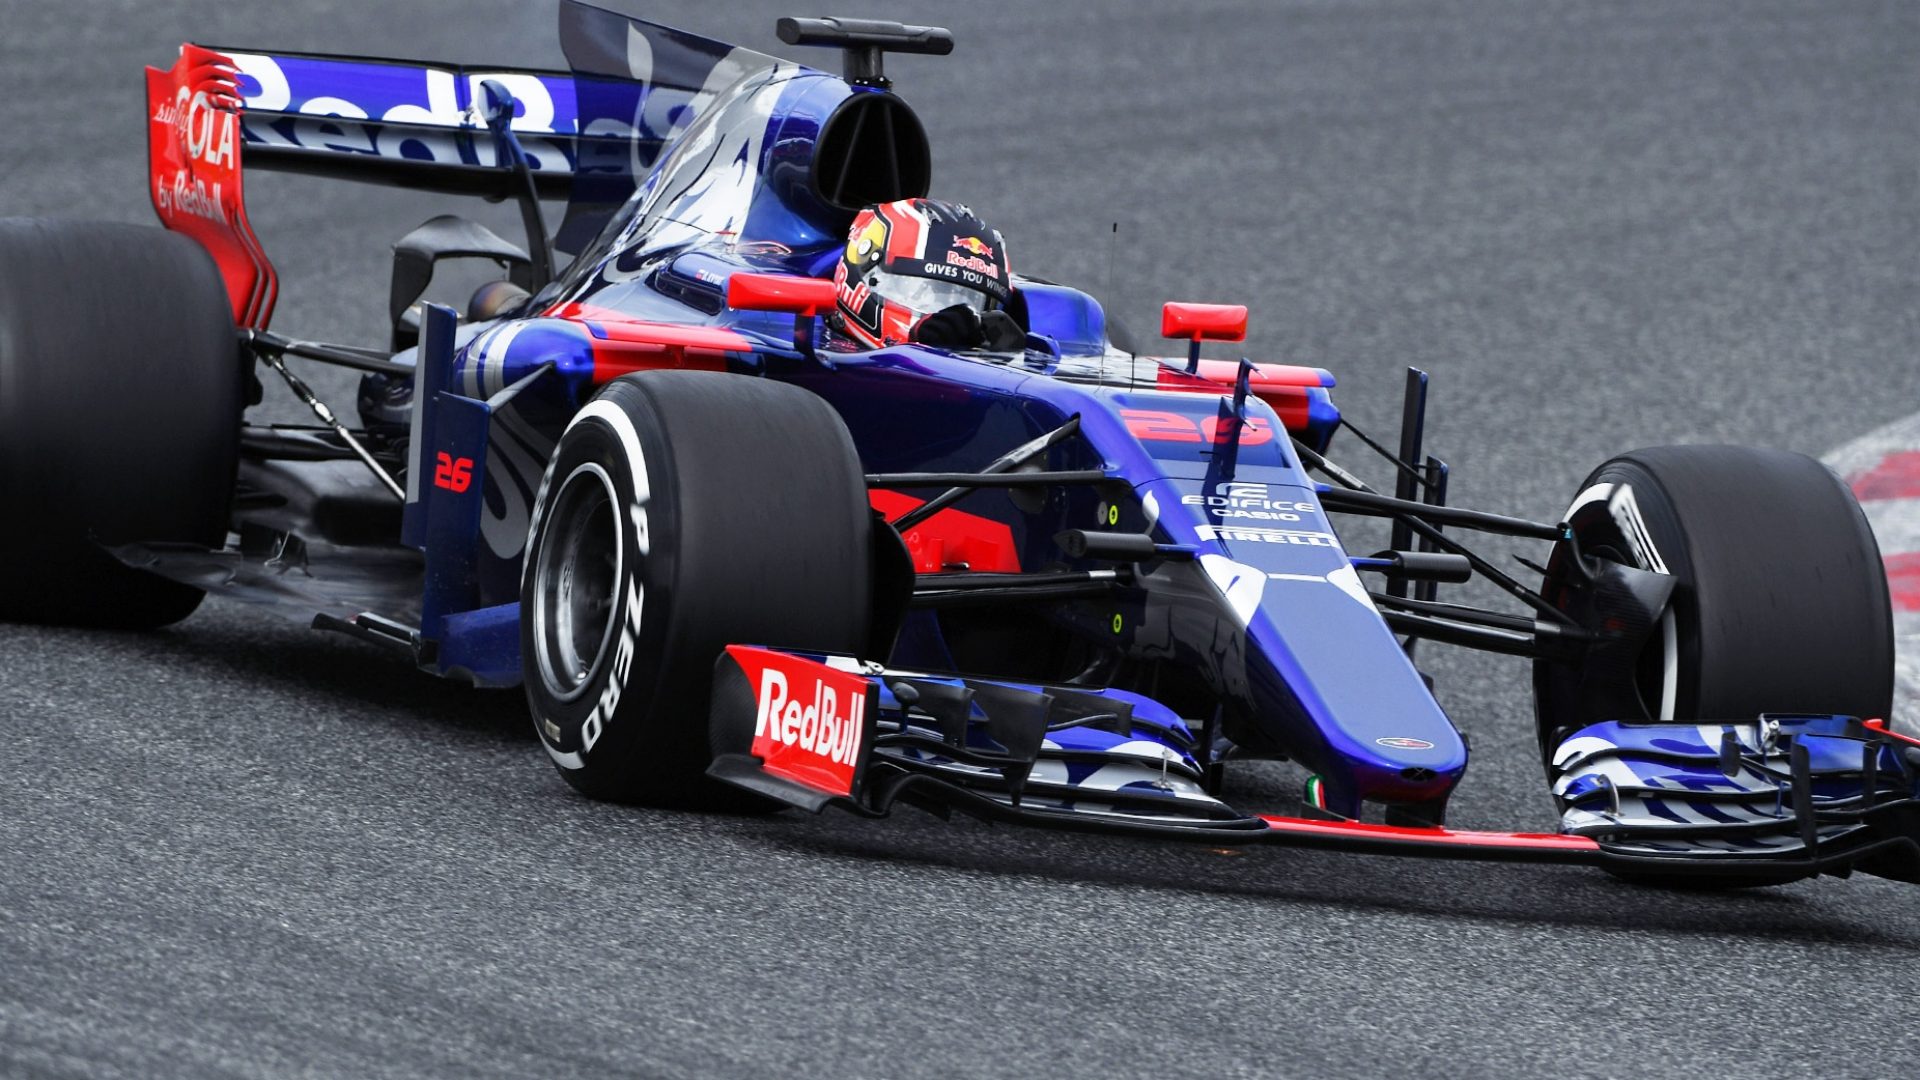 Toro Rosso is the little brother Red Bull. The driver line up is a little less talented and their car is a little powerful. That being said, Toro Rosso is always an exciting team to watch. They have some of the most talented young drivers and are always capable of delivering a respectable performance. It is safe to assume they will end up in the middle of the standings.